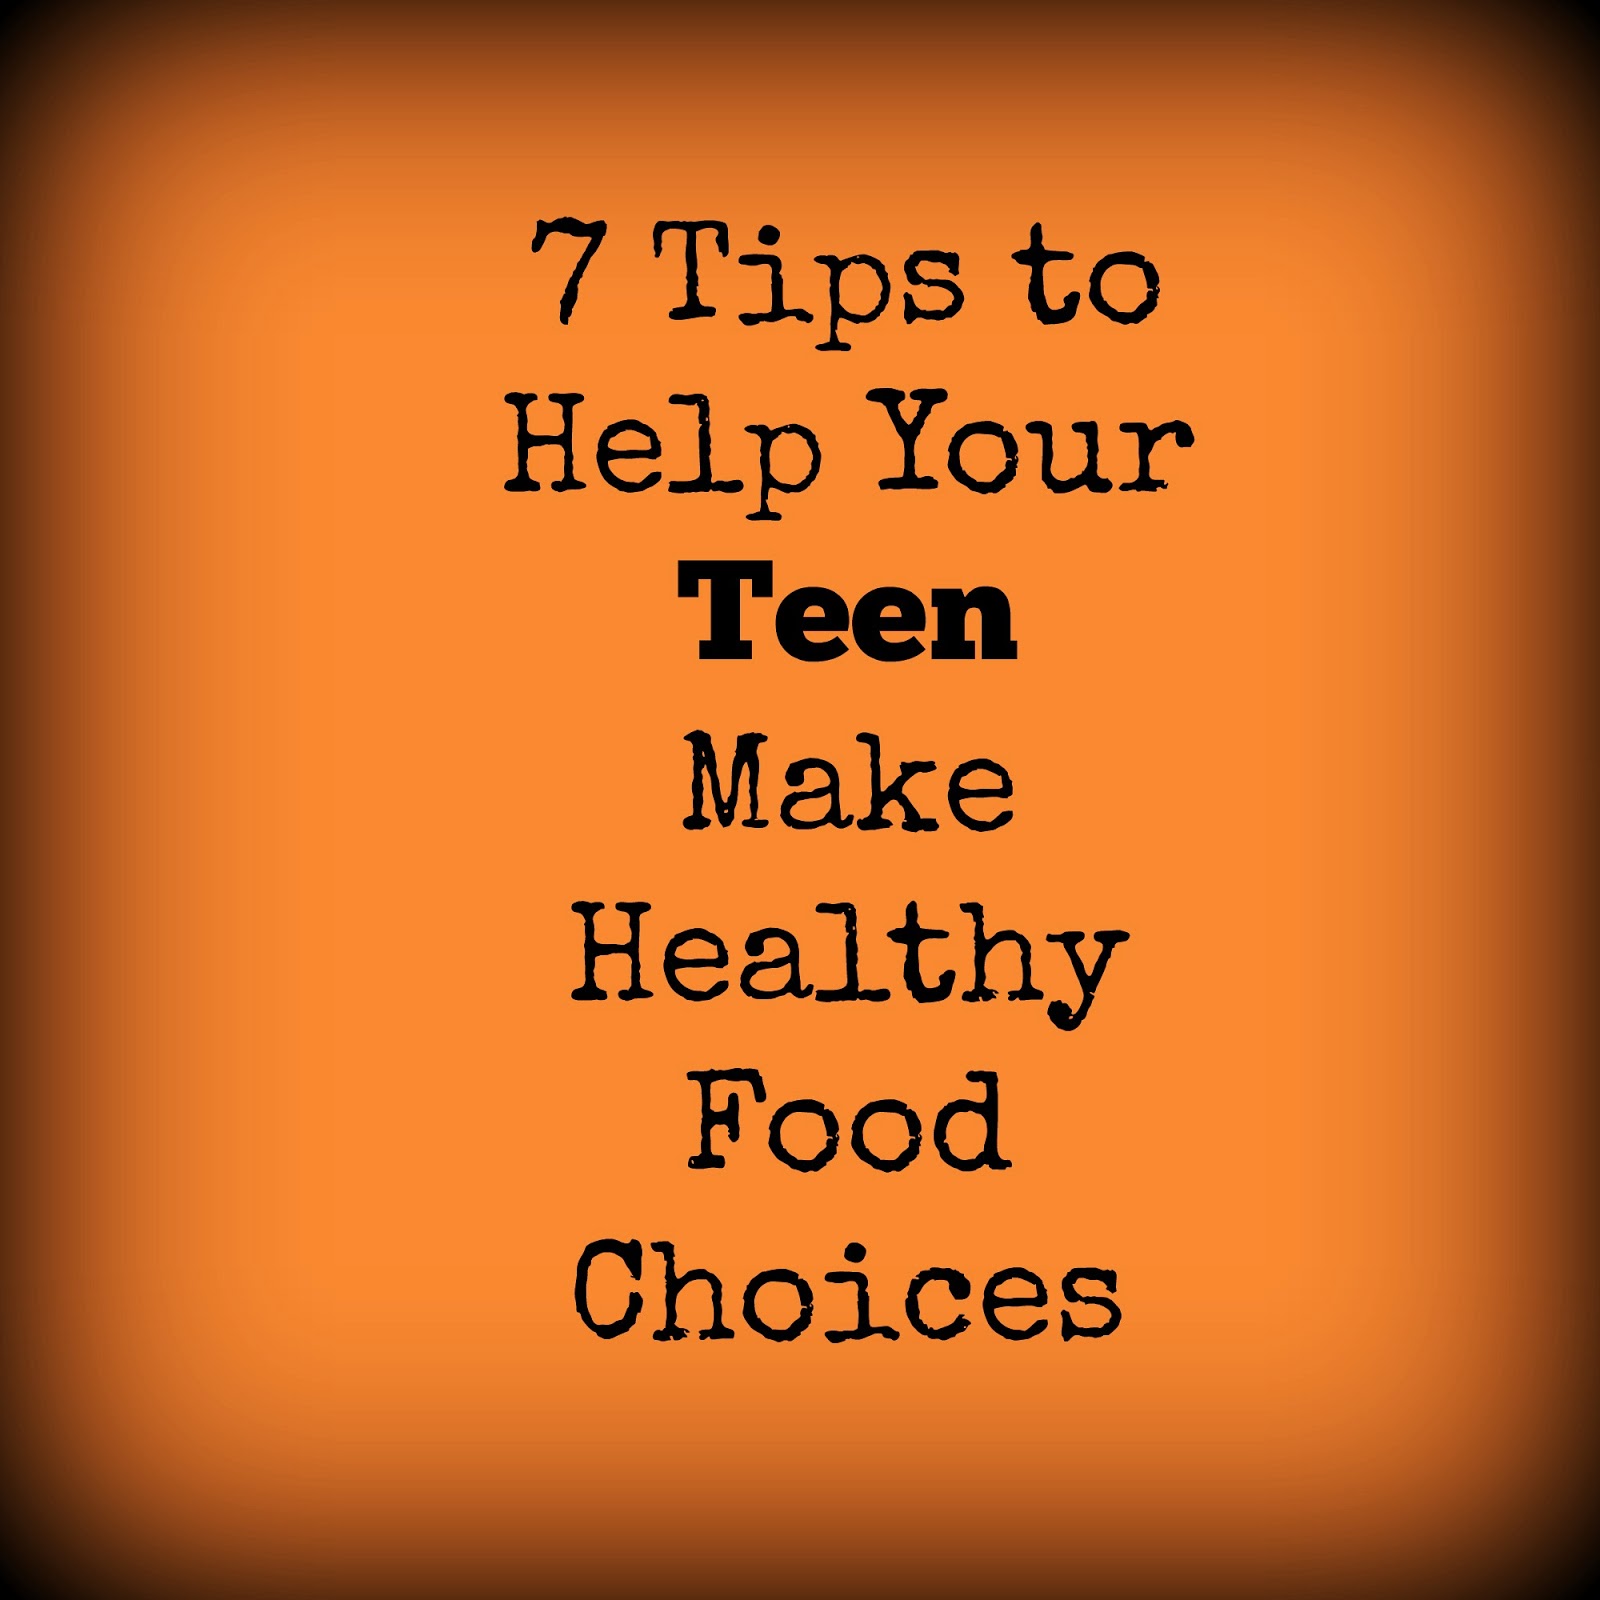 7 Tips to Help Your Teen Make Healthy Food Choices